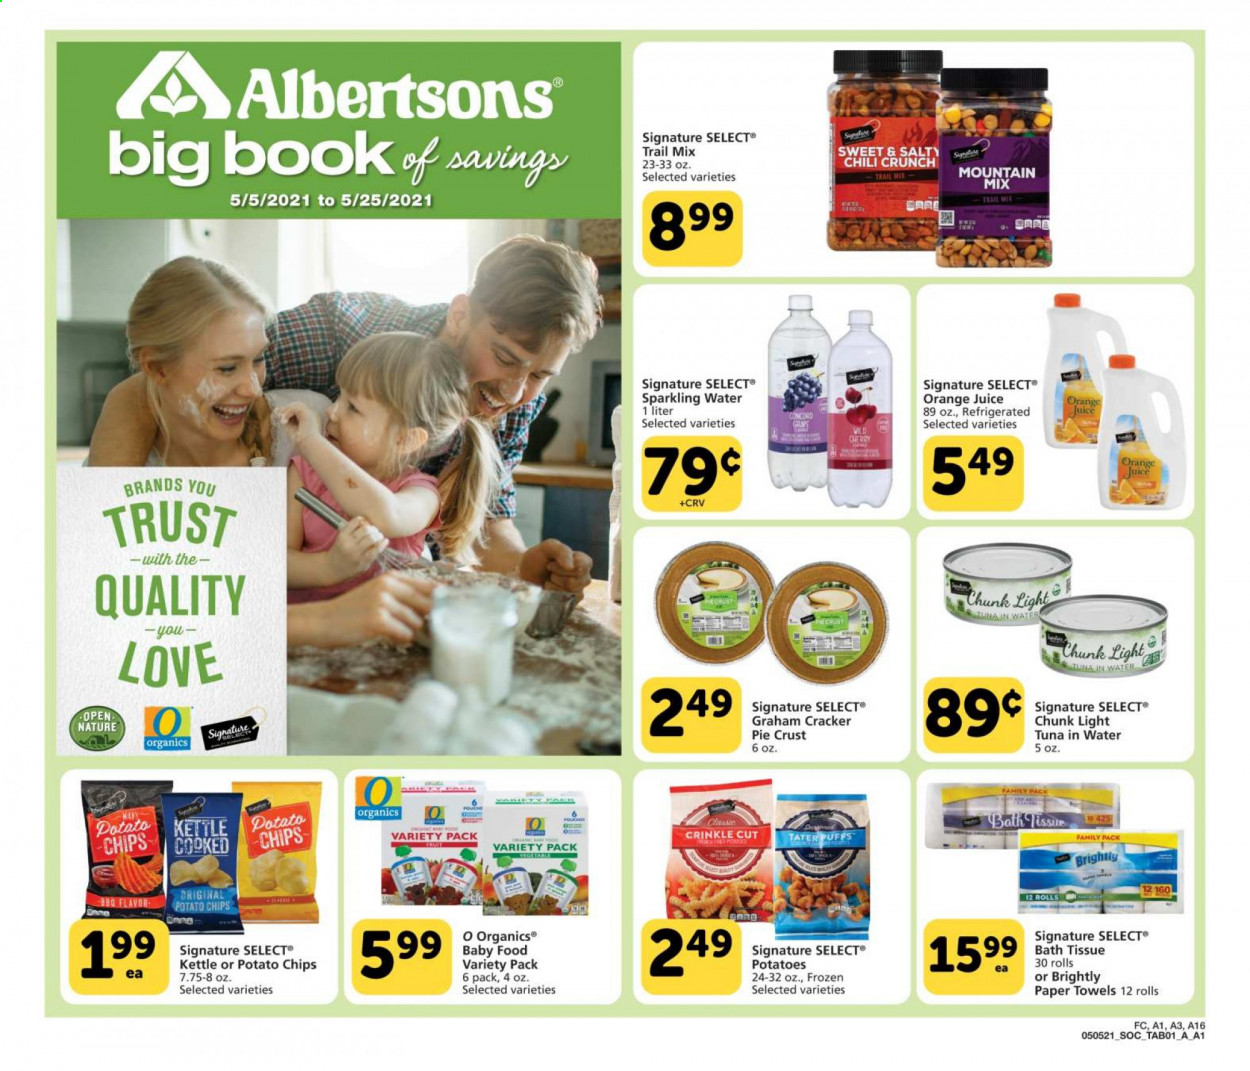 thumbnail - Albertsons Flyer - 05/05/2021 - 05/25/2021 - Sales products - puffs, cherries, tuna, crinkle fries, crackers, potato chips, pie crust, tuna in water, light tuna, trail mix, orange juice, juice, sparkling water, bath tissue, kitchen towels, paper towels, Trust. Page 1.